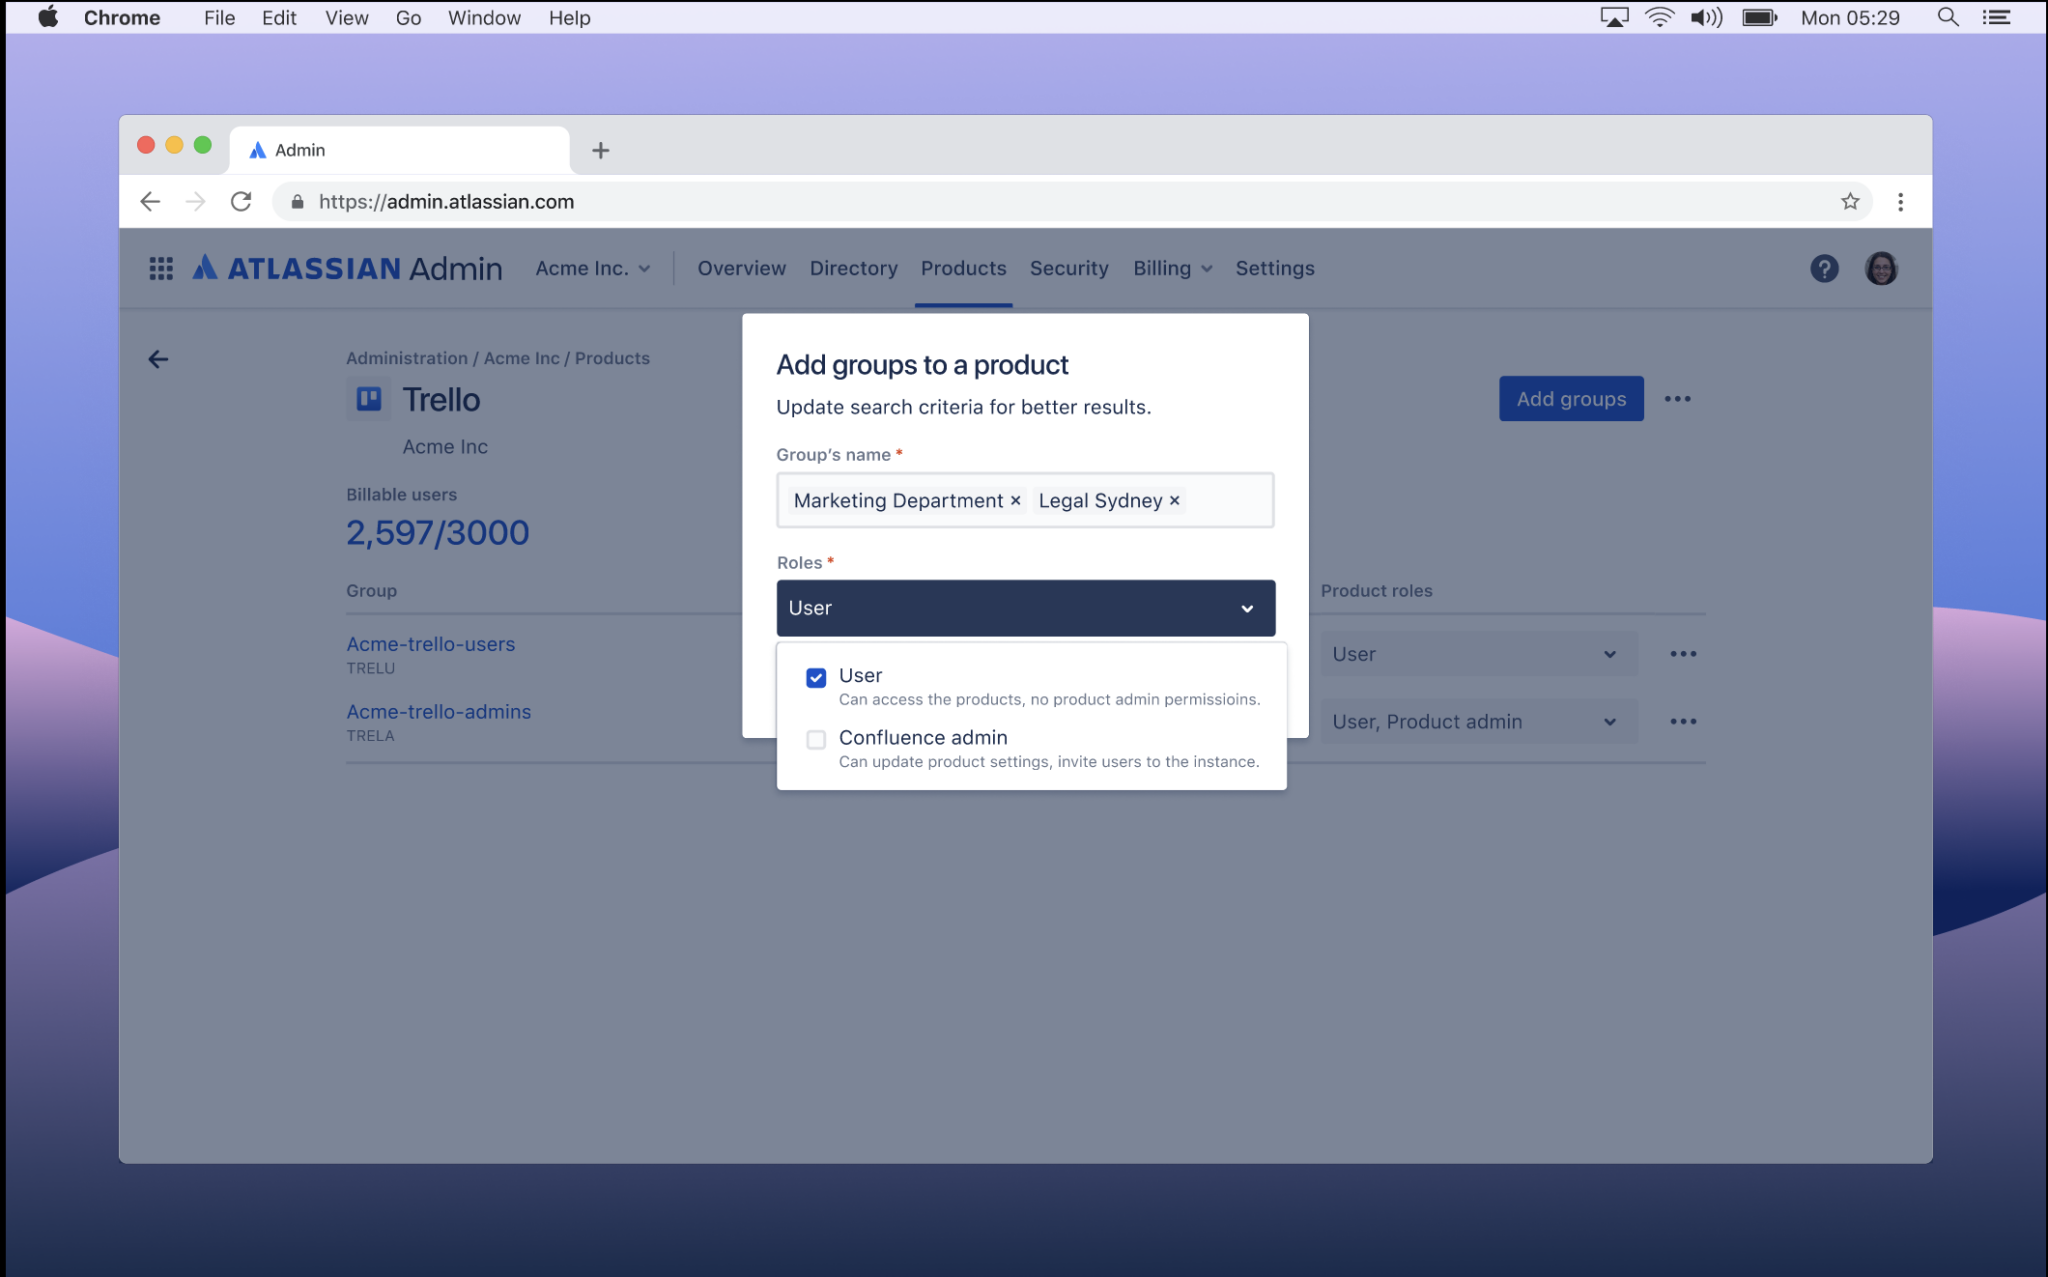 Admins are now able to add Trello to active user groups at their company